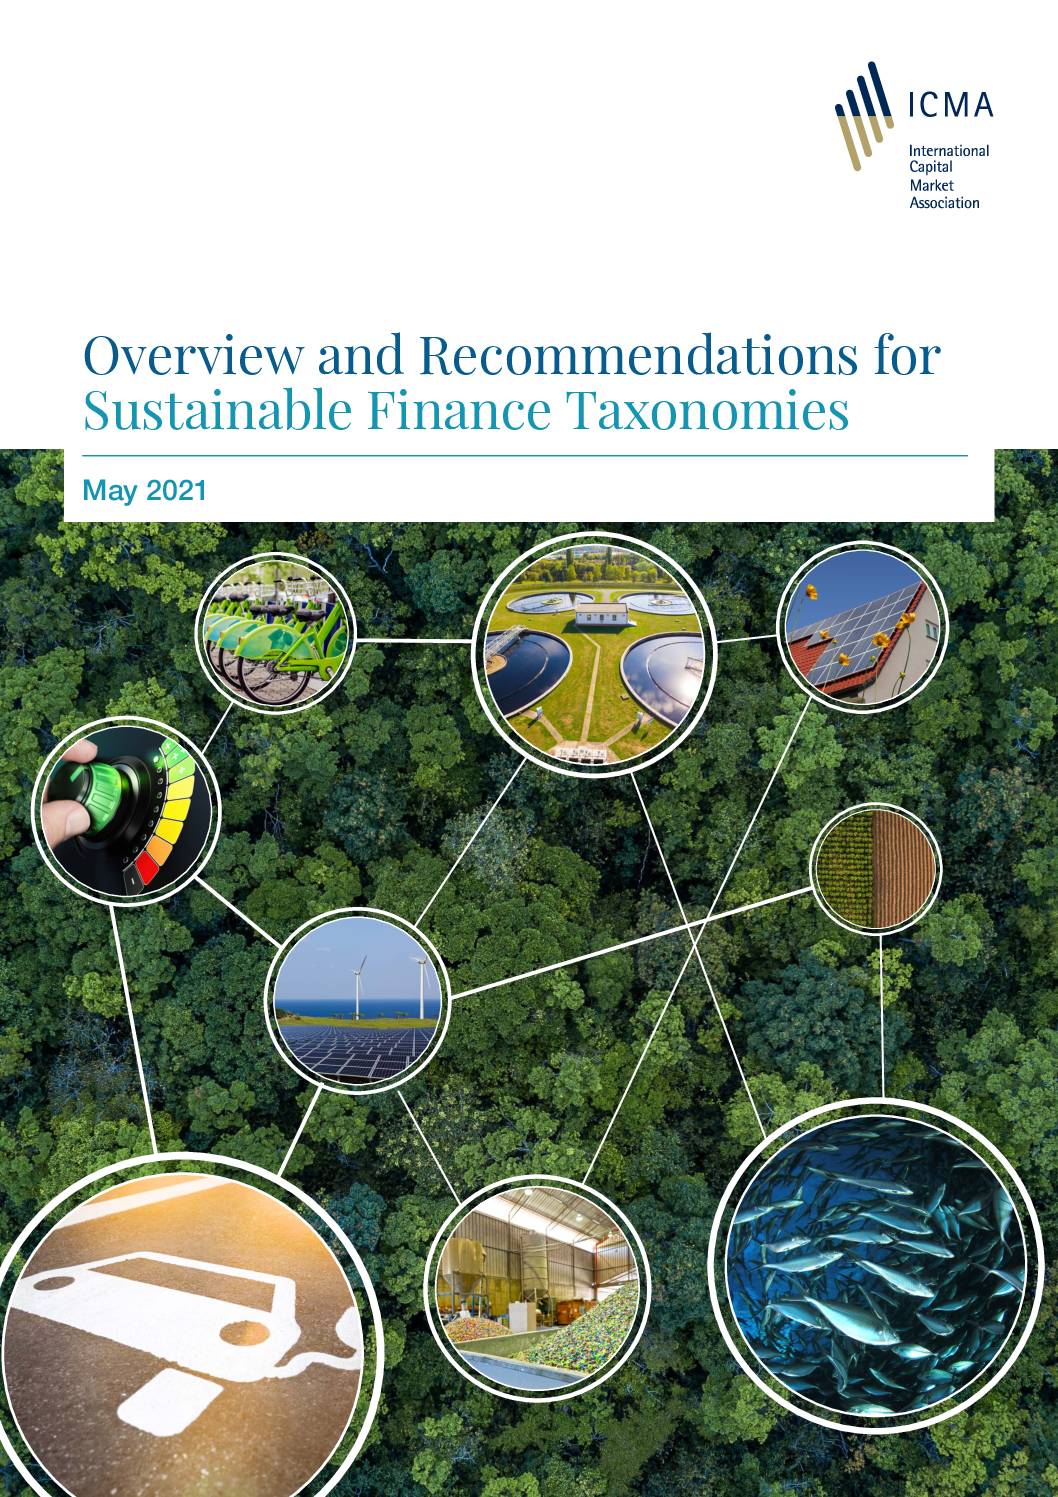 ICMA Publishes Overview of ‘Taxonomies’ for Sustainable Finance and Recommends Success Criteria